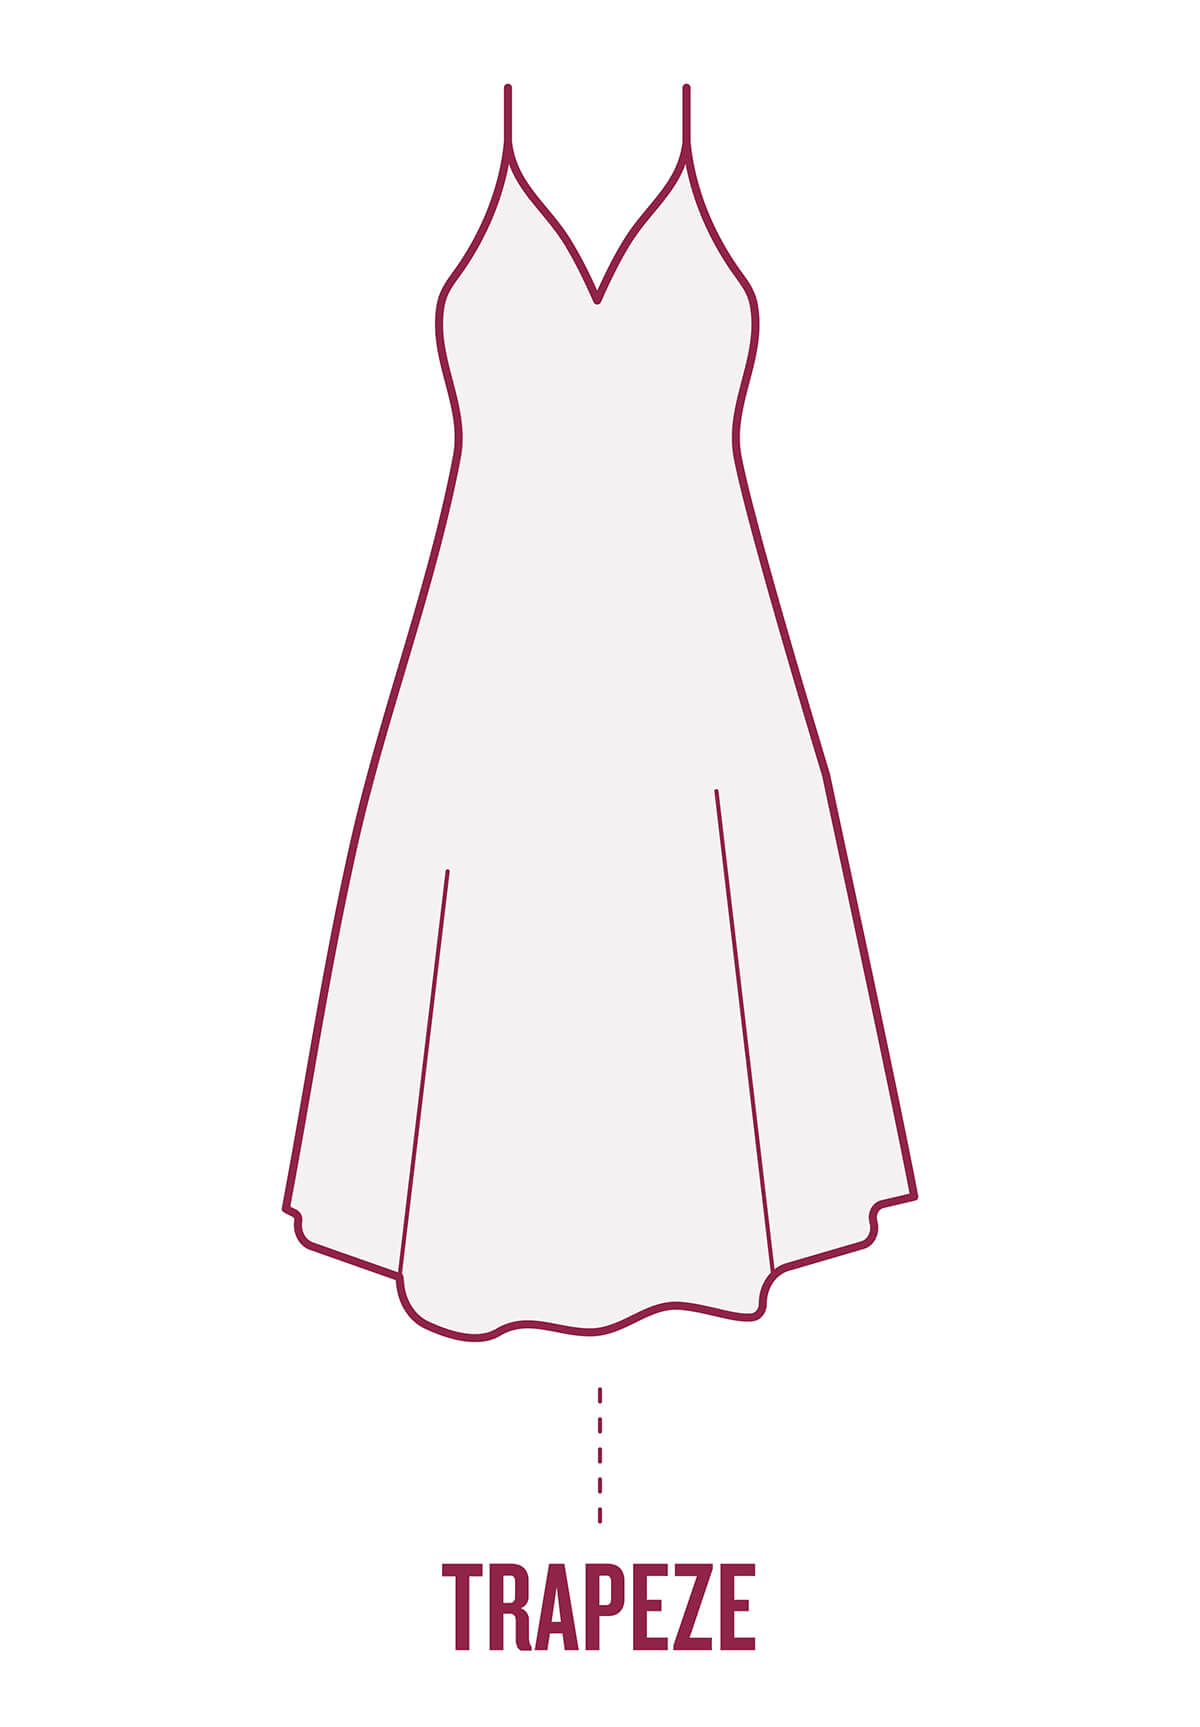 Your Perfect Dress